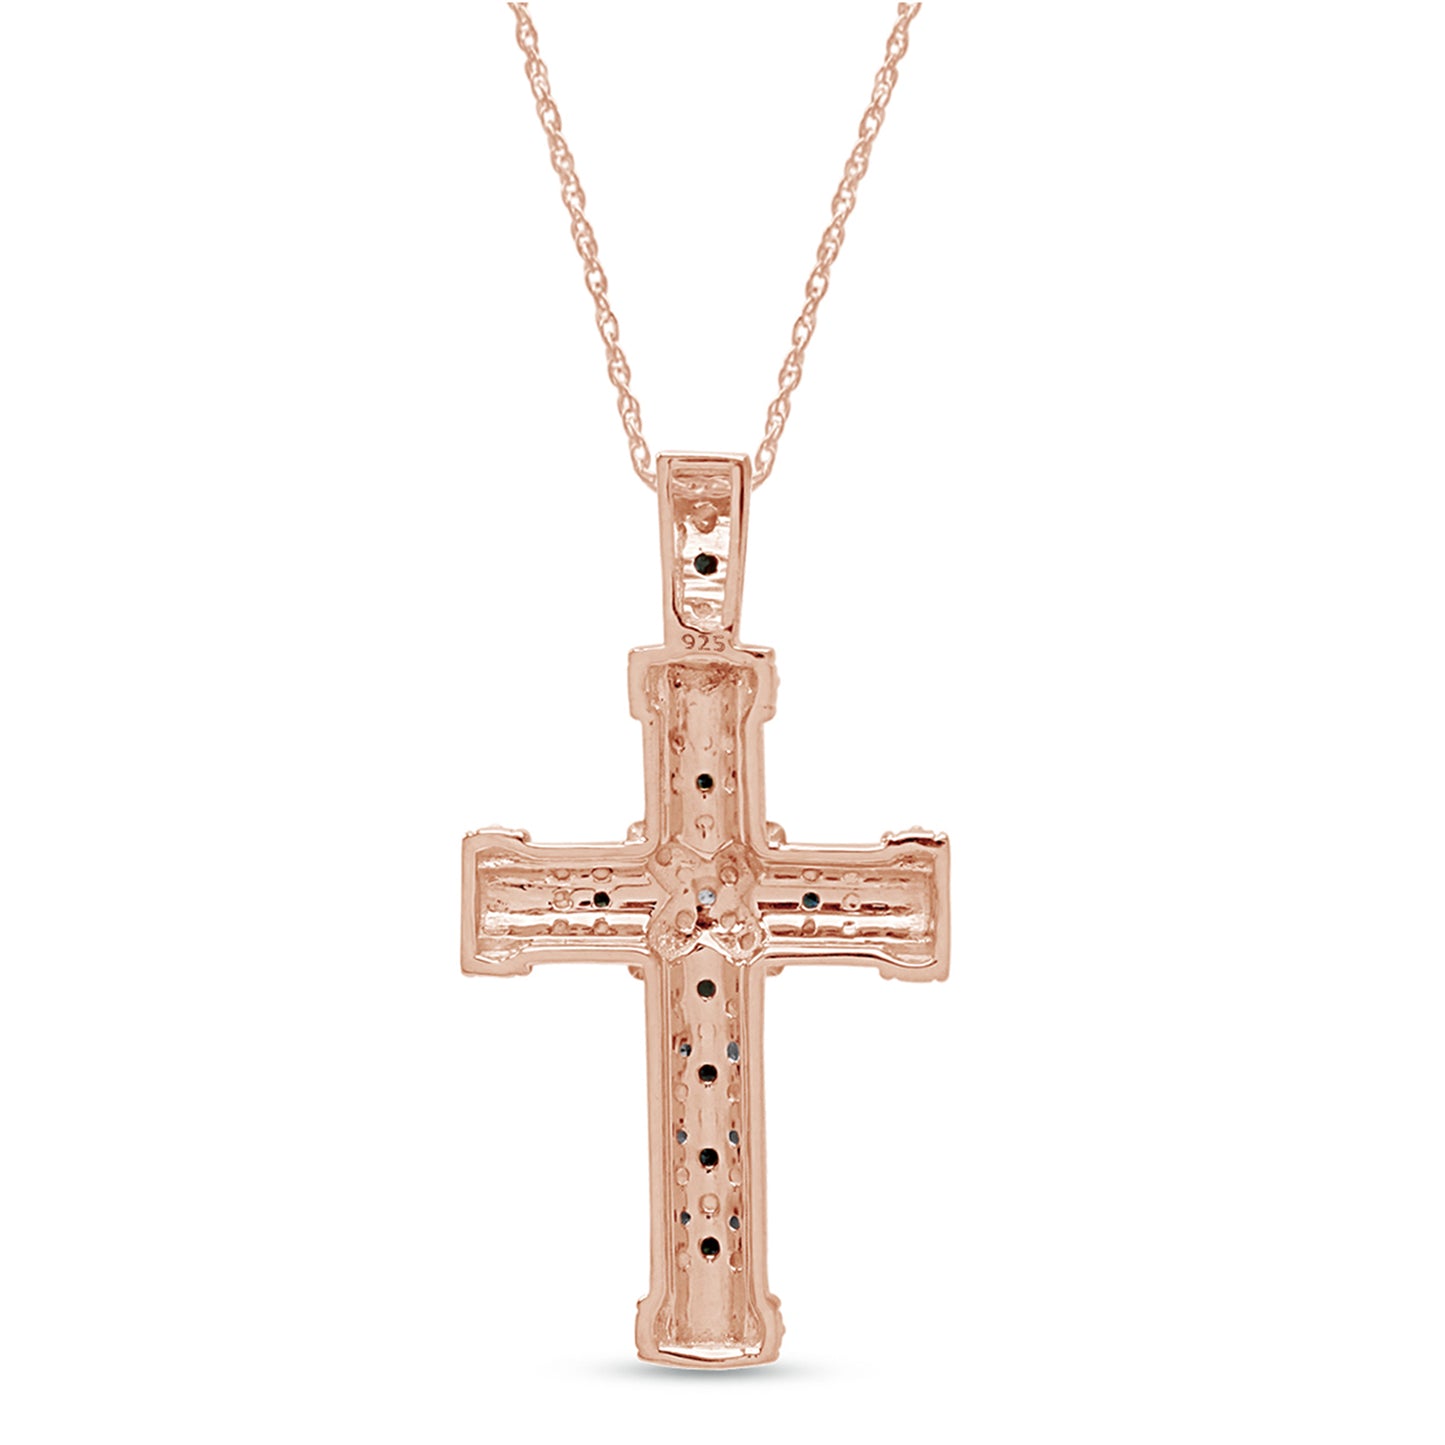 Round Shape Blue & White Natural Diamond Cross Pendant Necklace 14k Gold Over 925 Sterling Silver Jewelry For Women (0.10 Cttw)